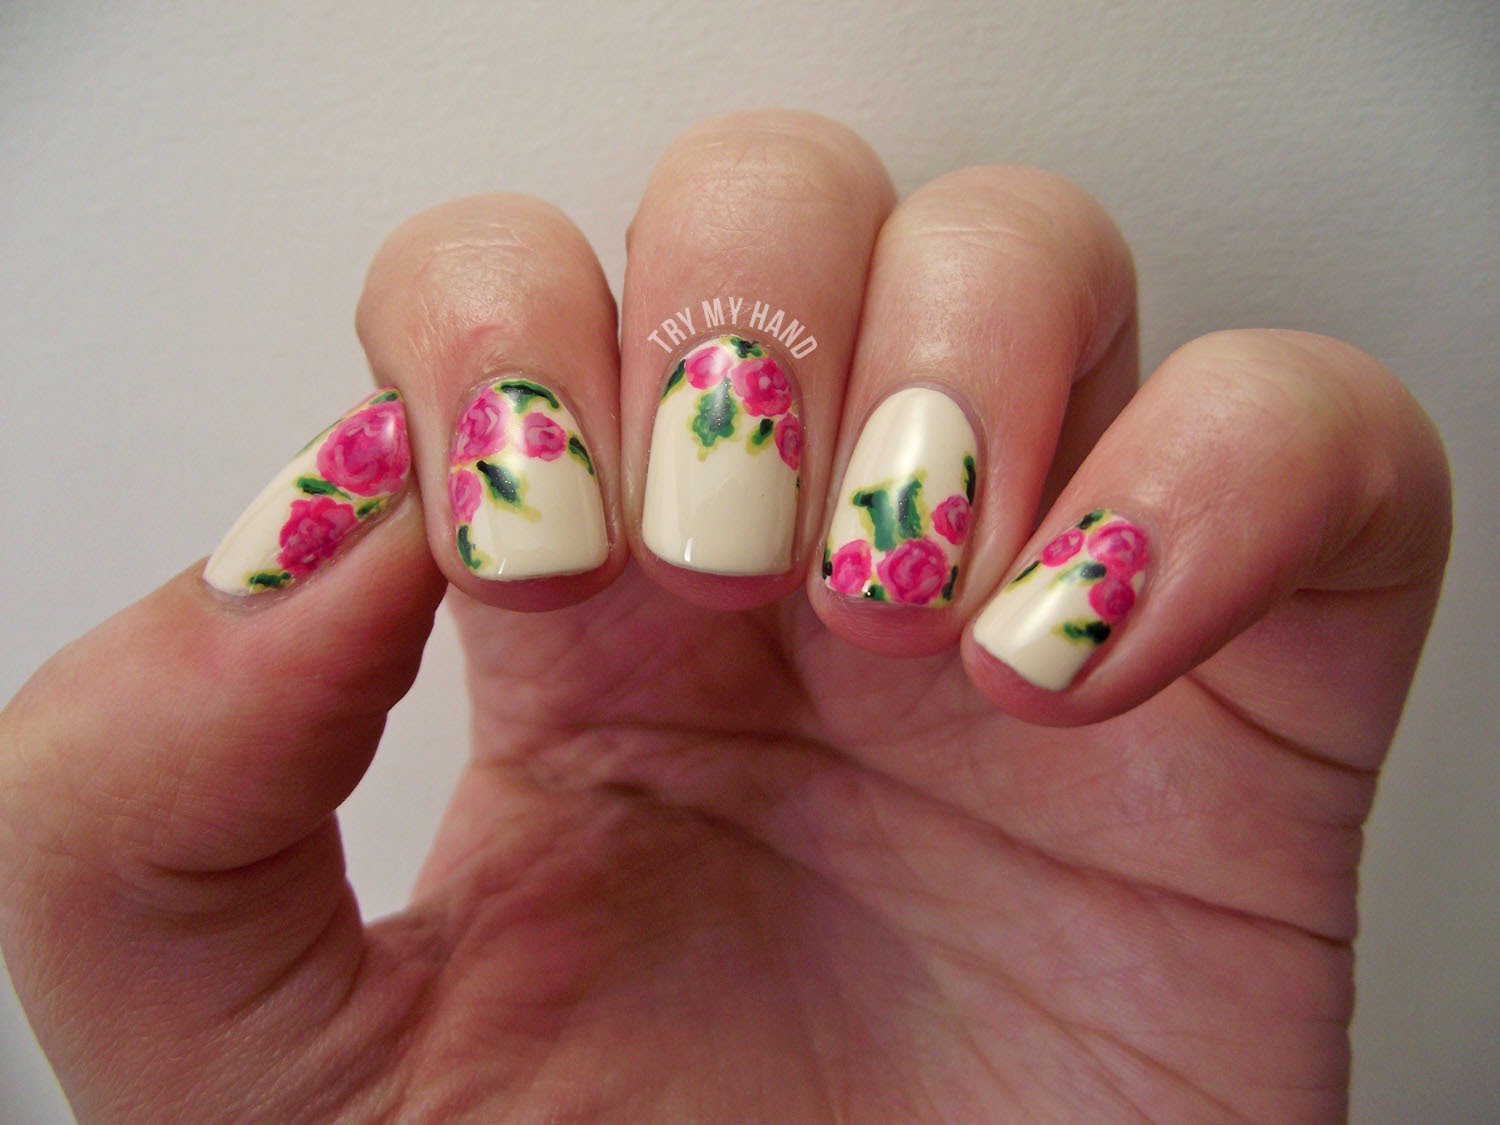 Floral Square Nail Art Tutorial - wide 2